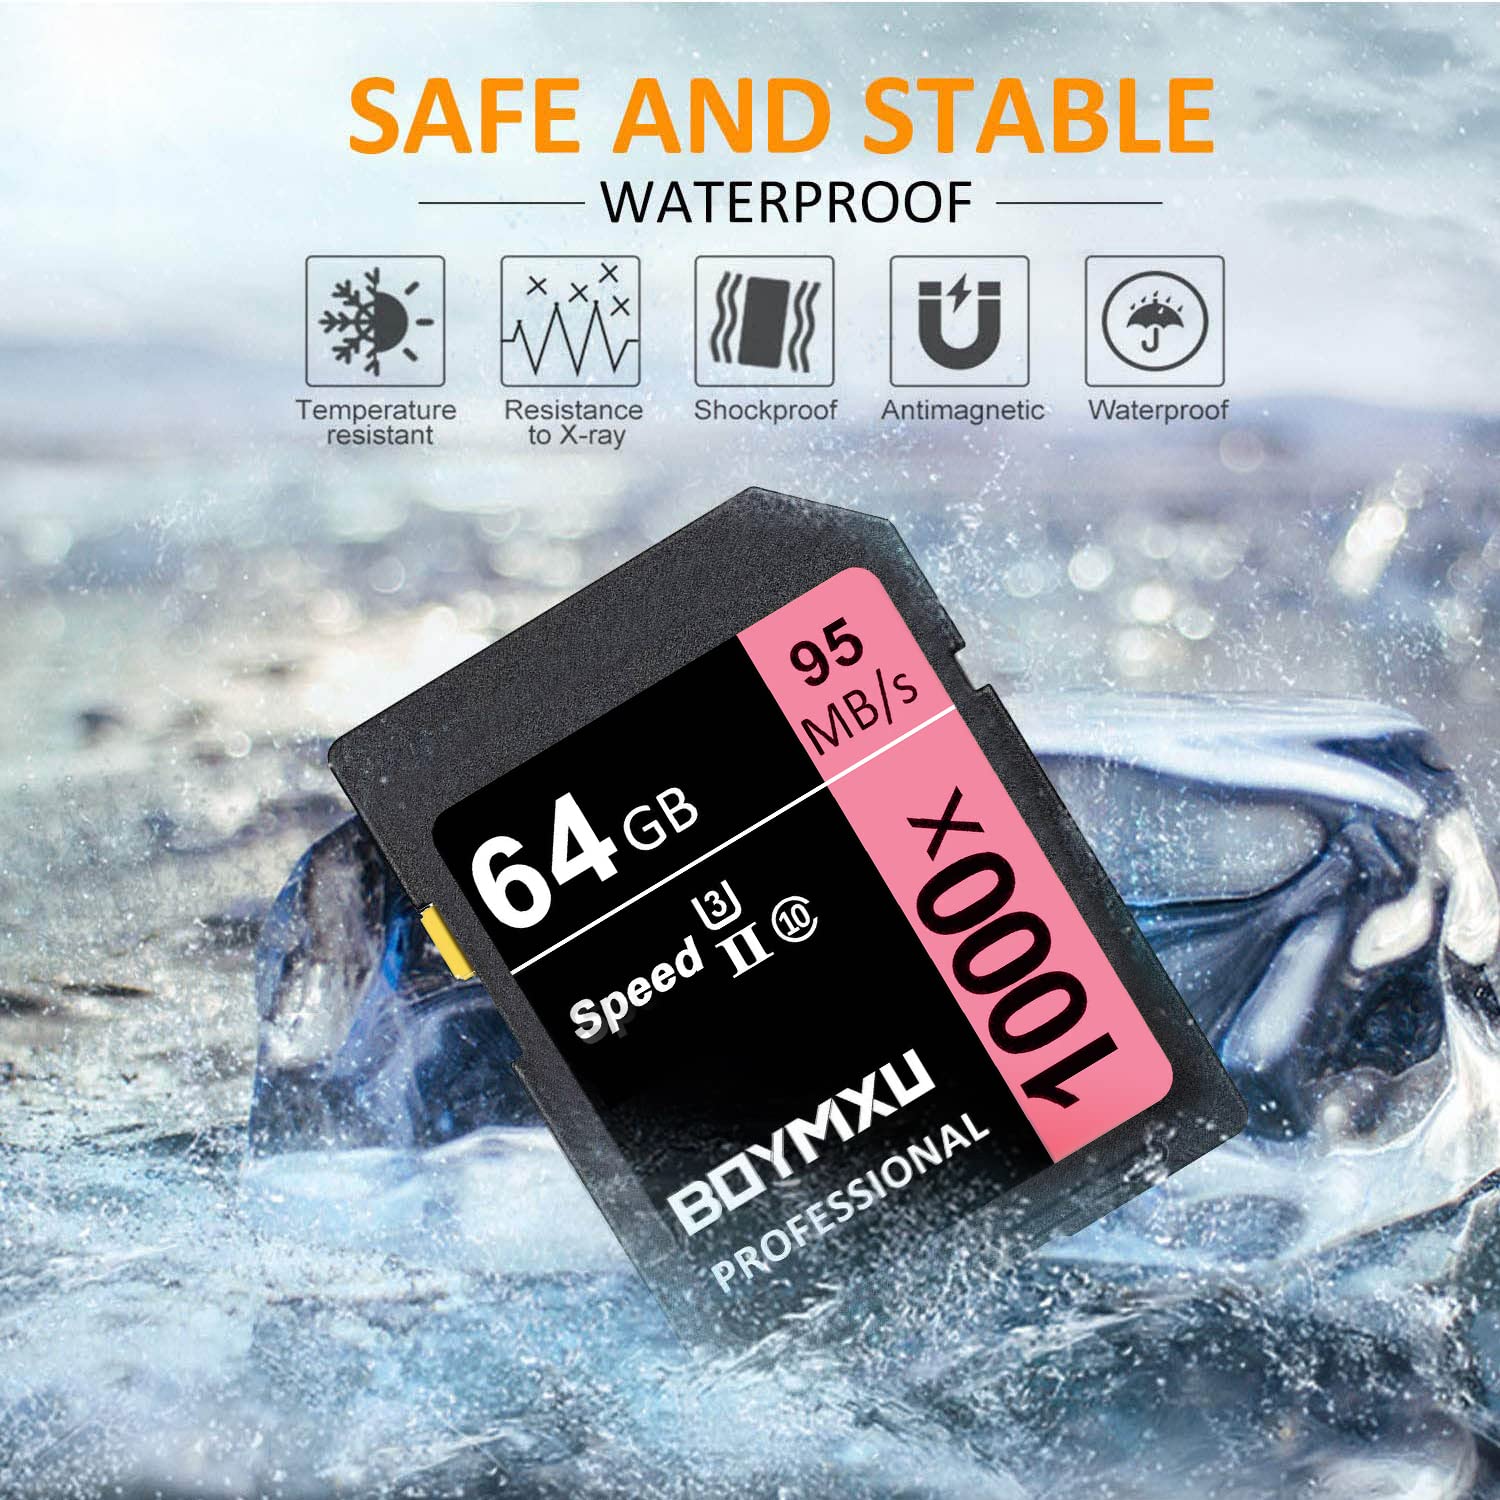 64GB Memory Card, BOYMXU Professional 1000 x Class 10 Card U3 Memory Card Compatible Computer Cameras and Camcorders, Camera Memory Card Up to 95MB/s, Pink